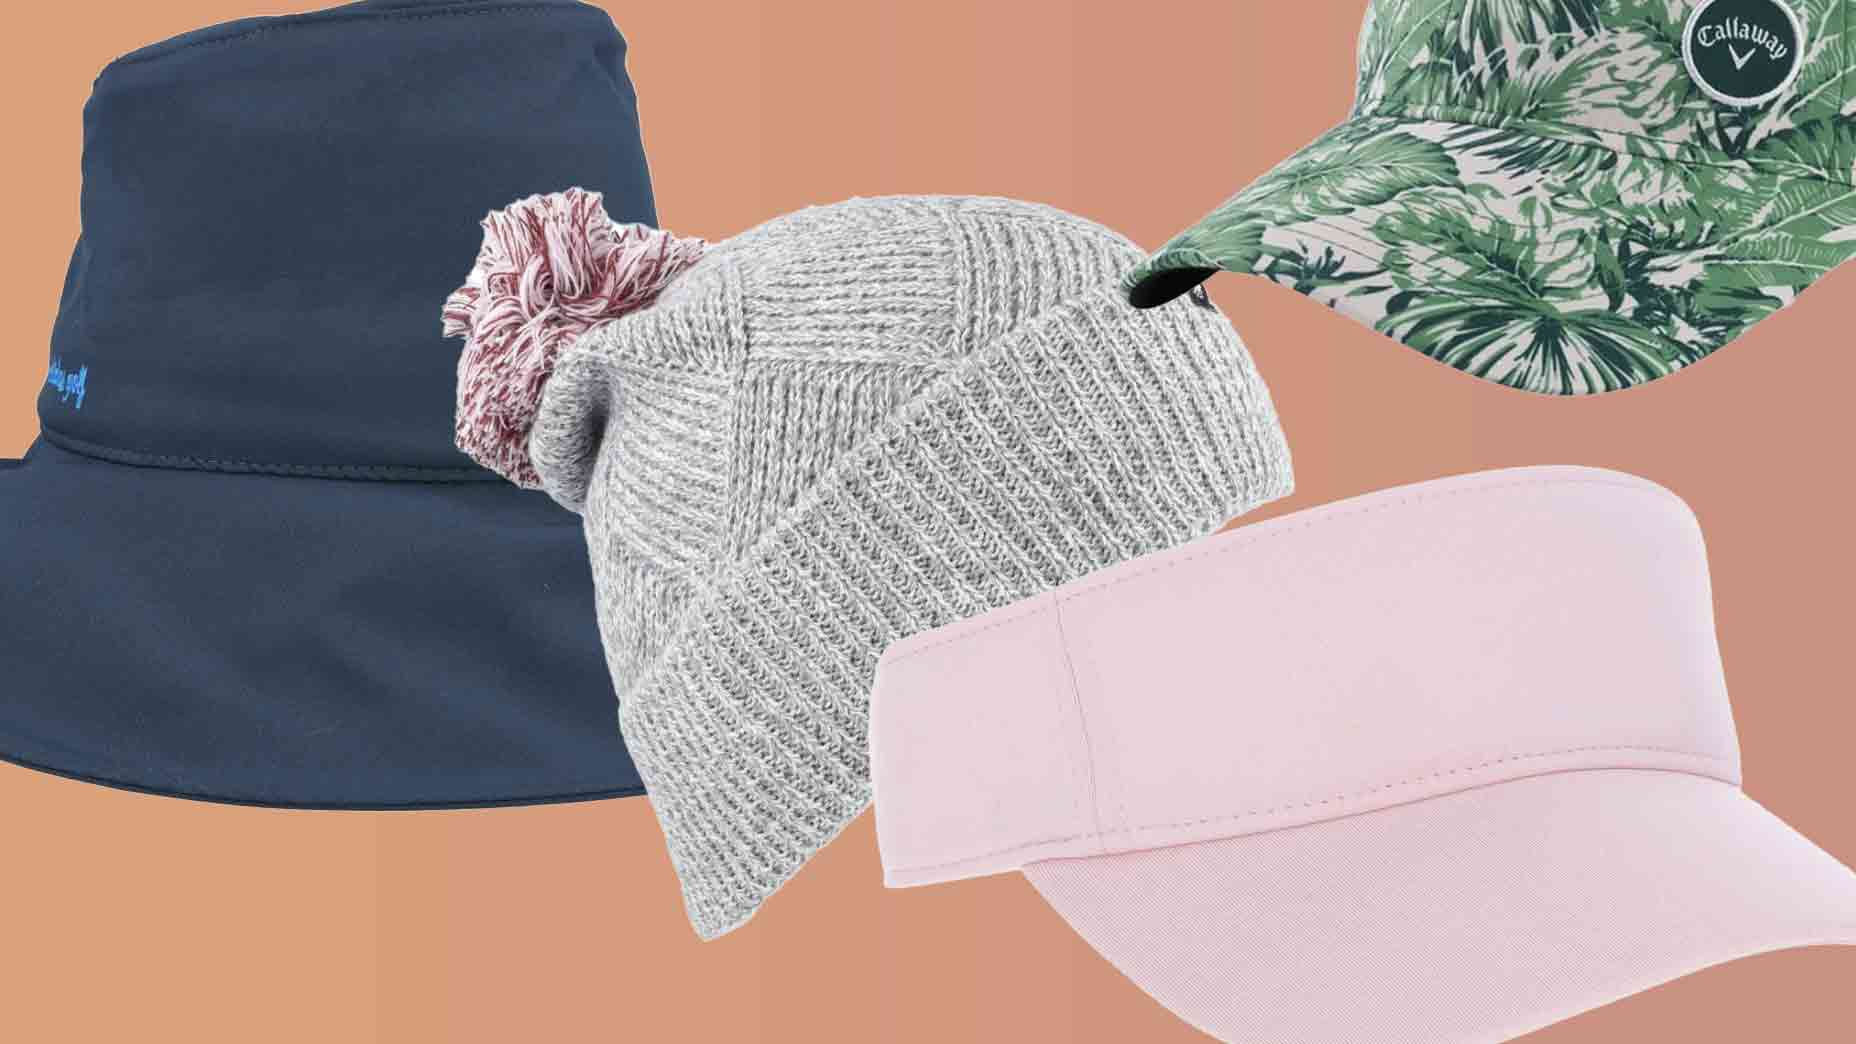 Add these 5 pieces of stylish women's headwear to your fall golf closet